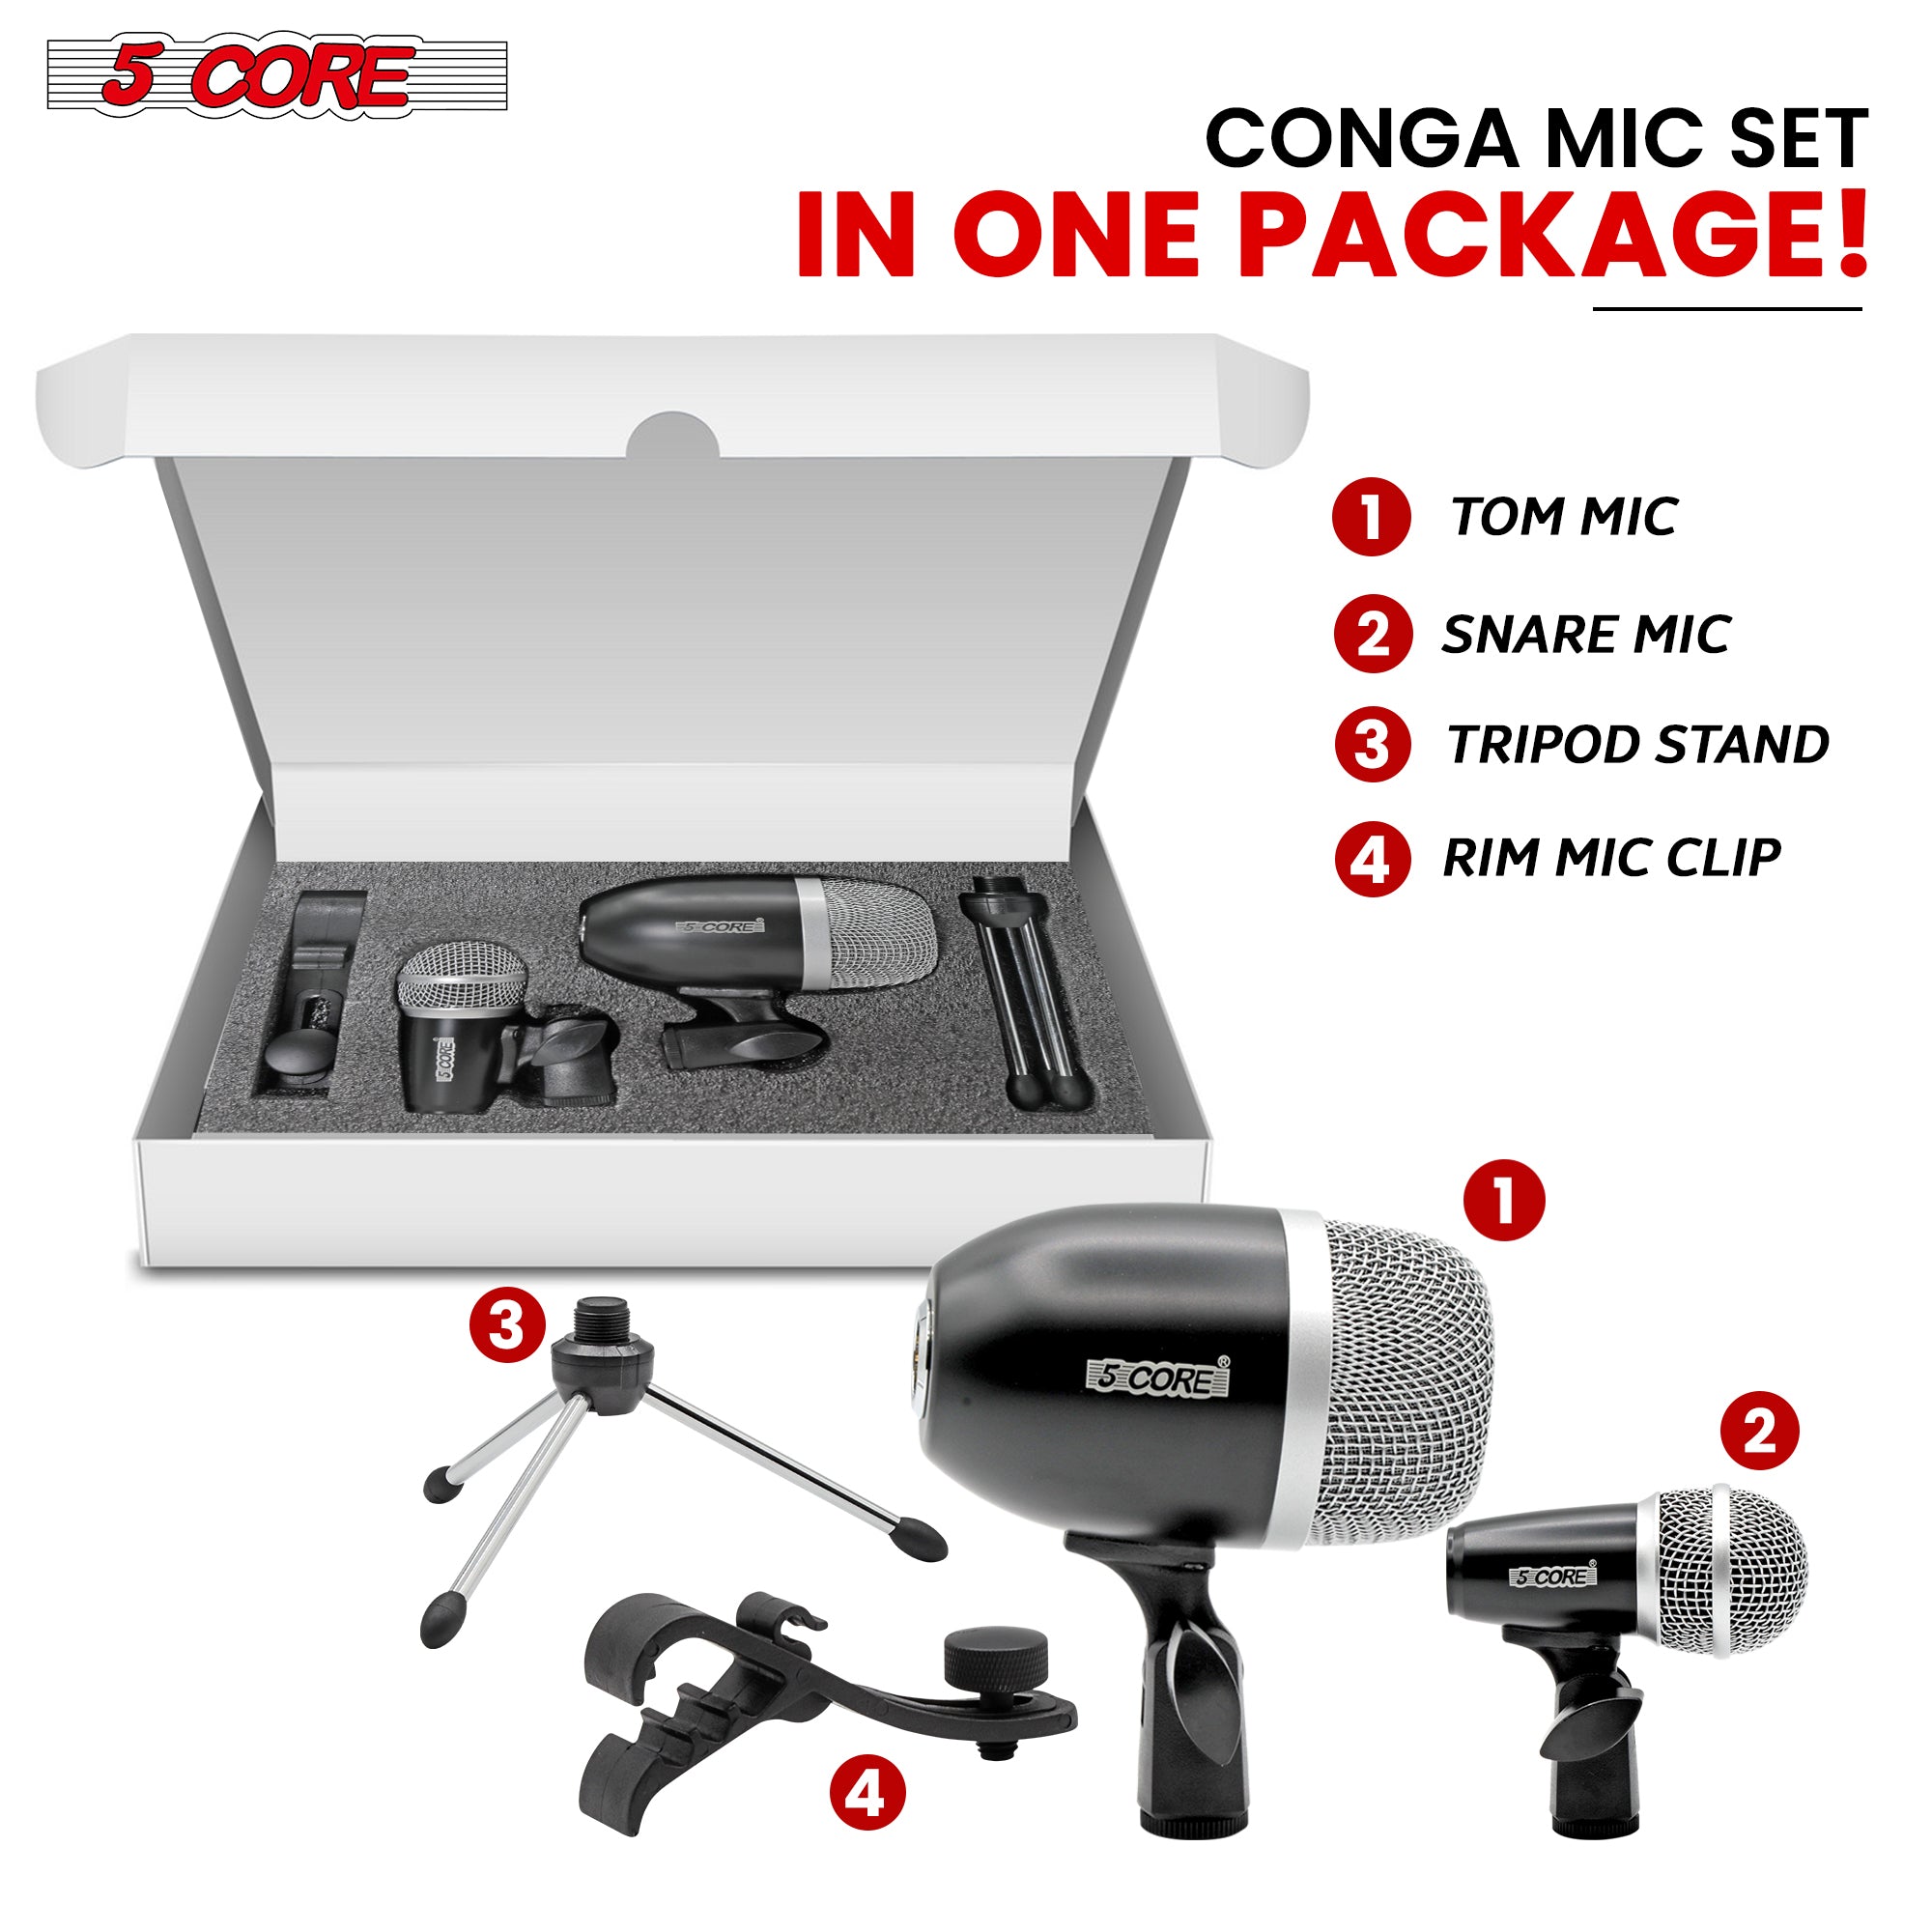 This Congo mic set Accessories include 1 Tom Mic, 1 Snare Mic, and 1 Conga Mic, providing a comprehensive solution for instrument recording.